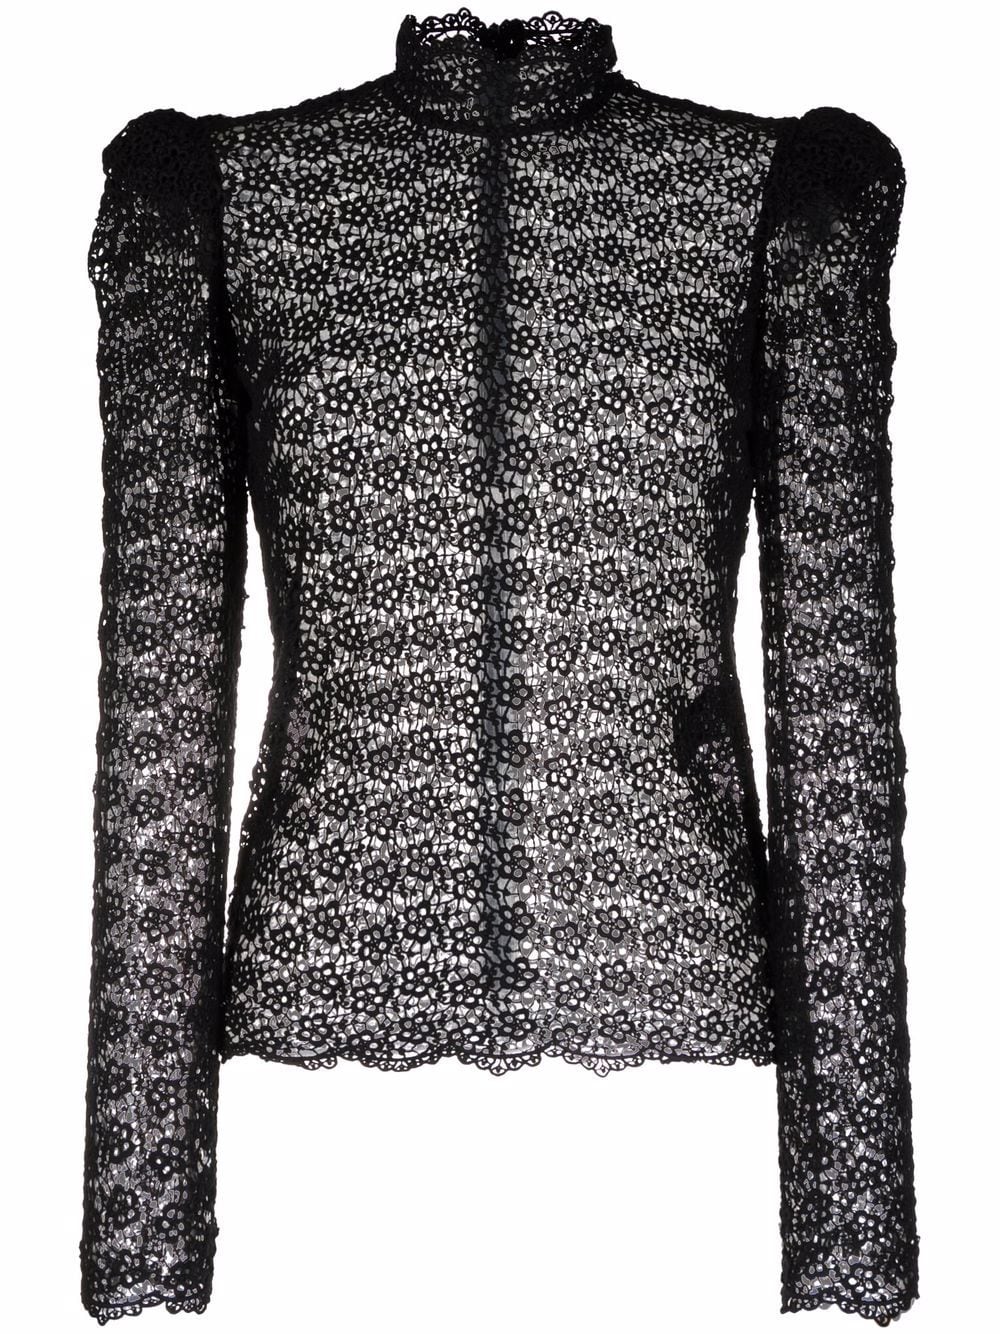 ISABEL MARANT Sheer Lace High Neck Top - Farfetch